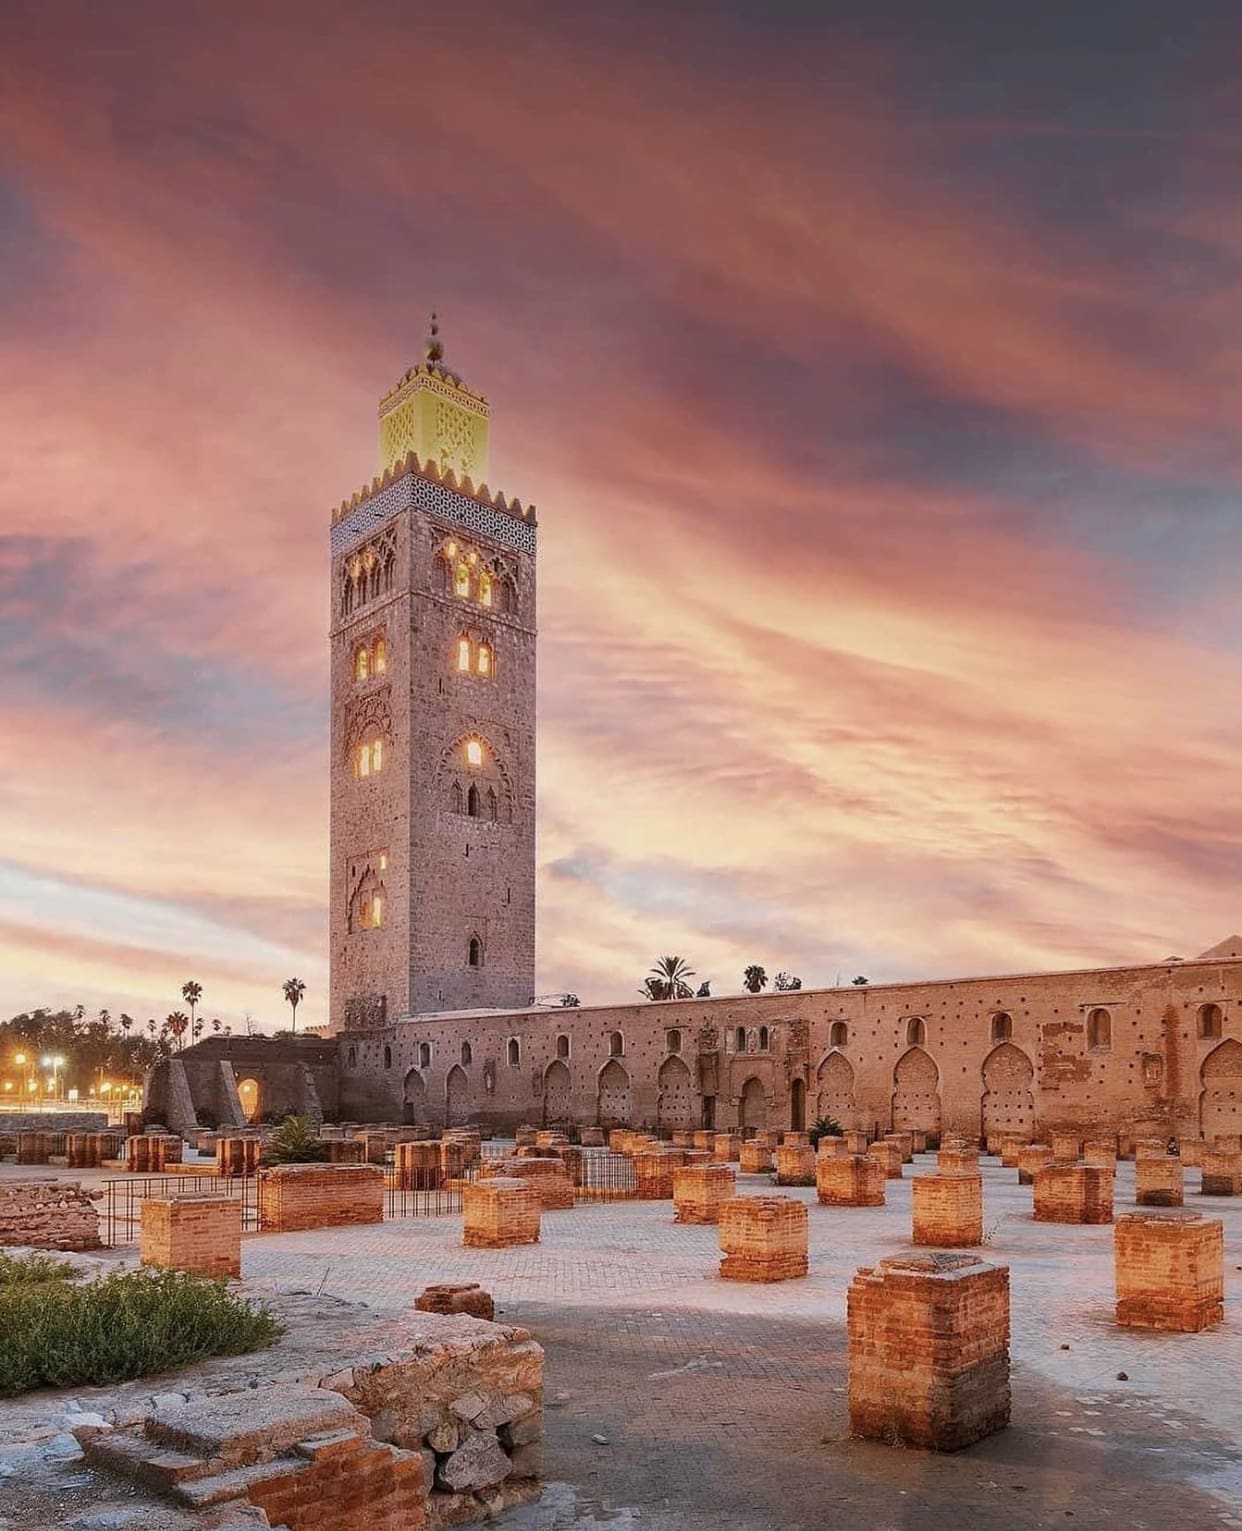 Iconic Koutoubia Mosque in Marrakech.